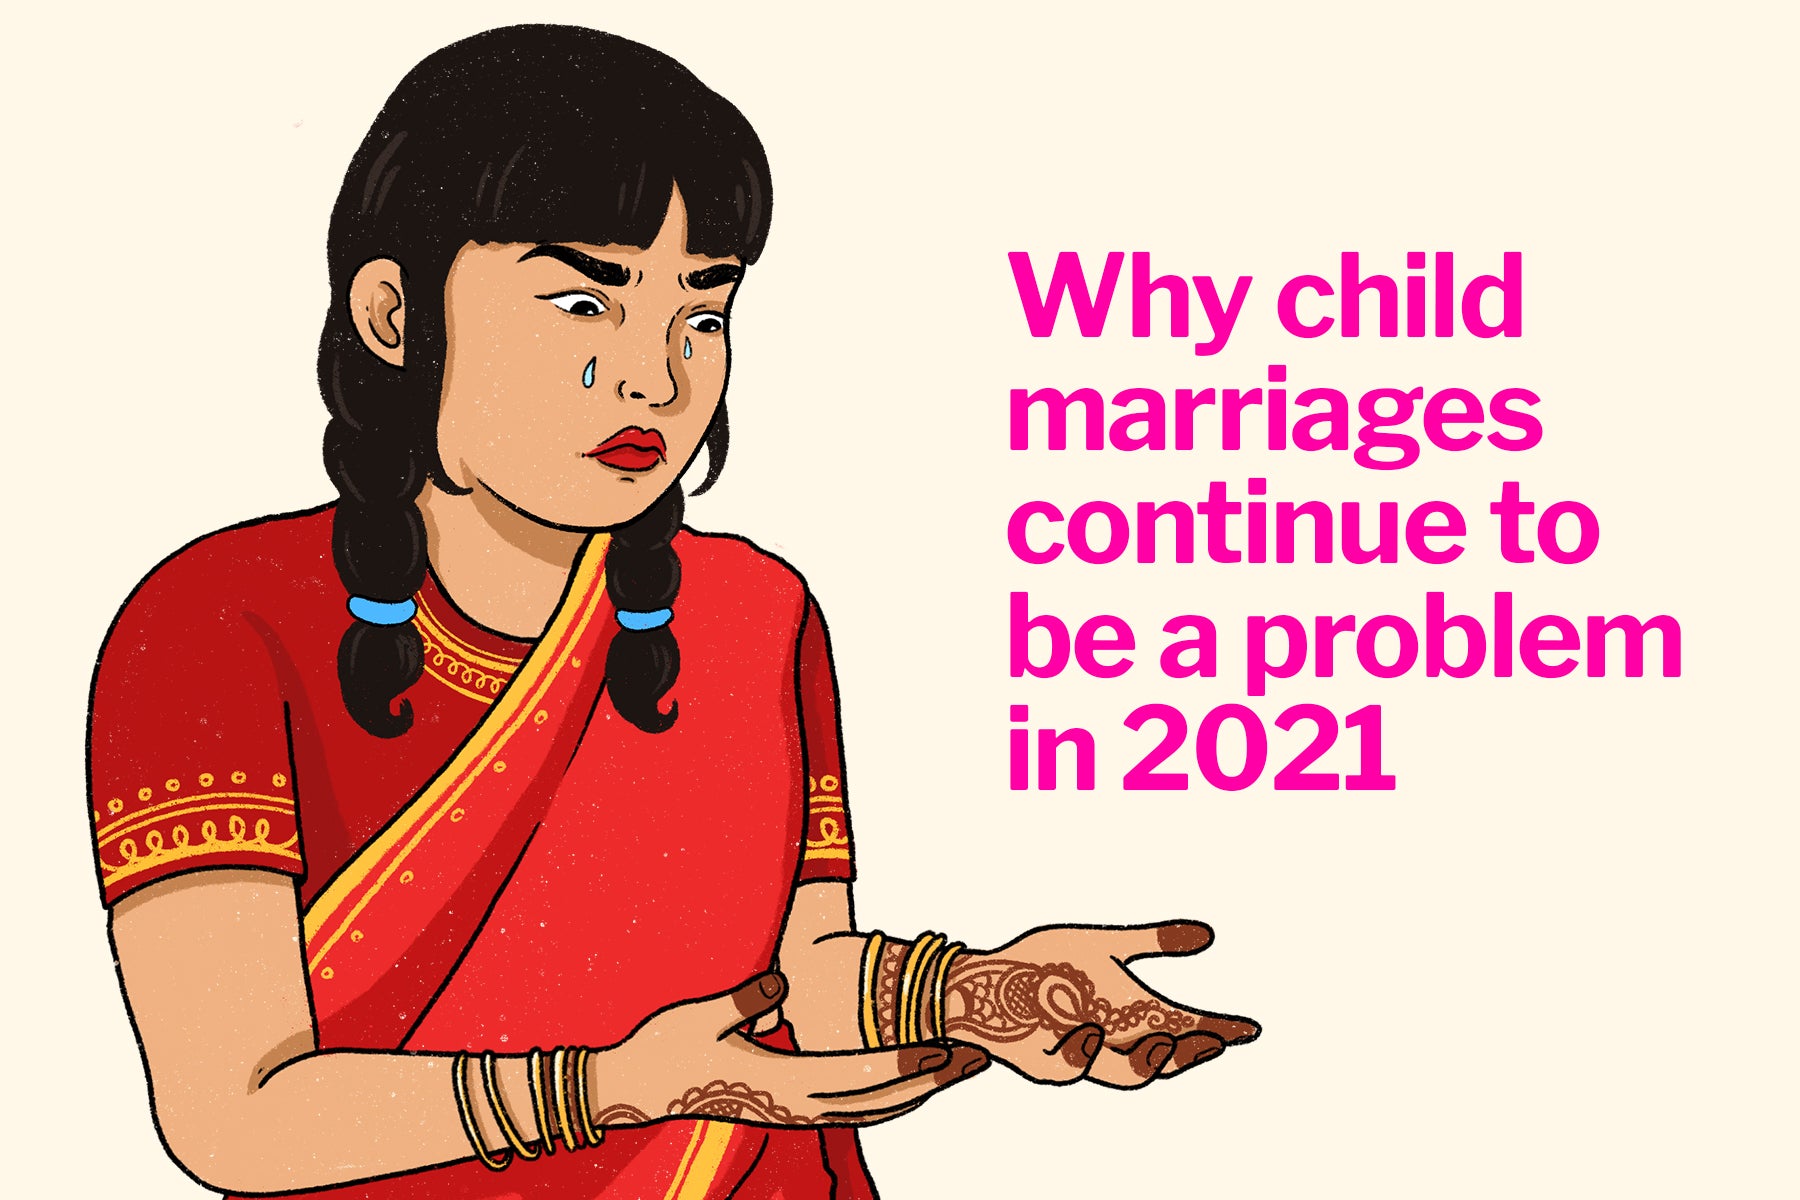 Why child marriages continue to be a problem in 2021